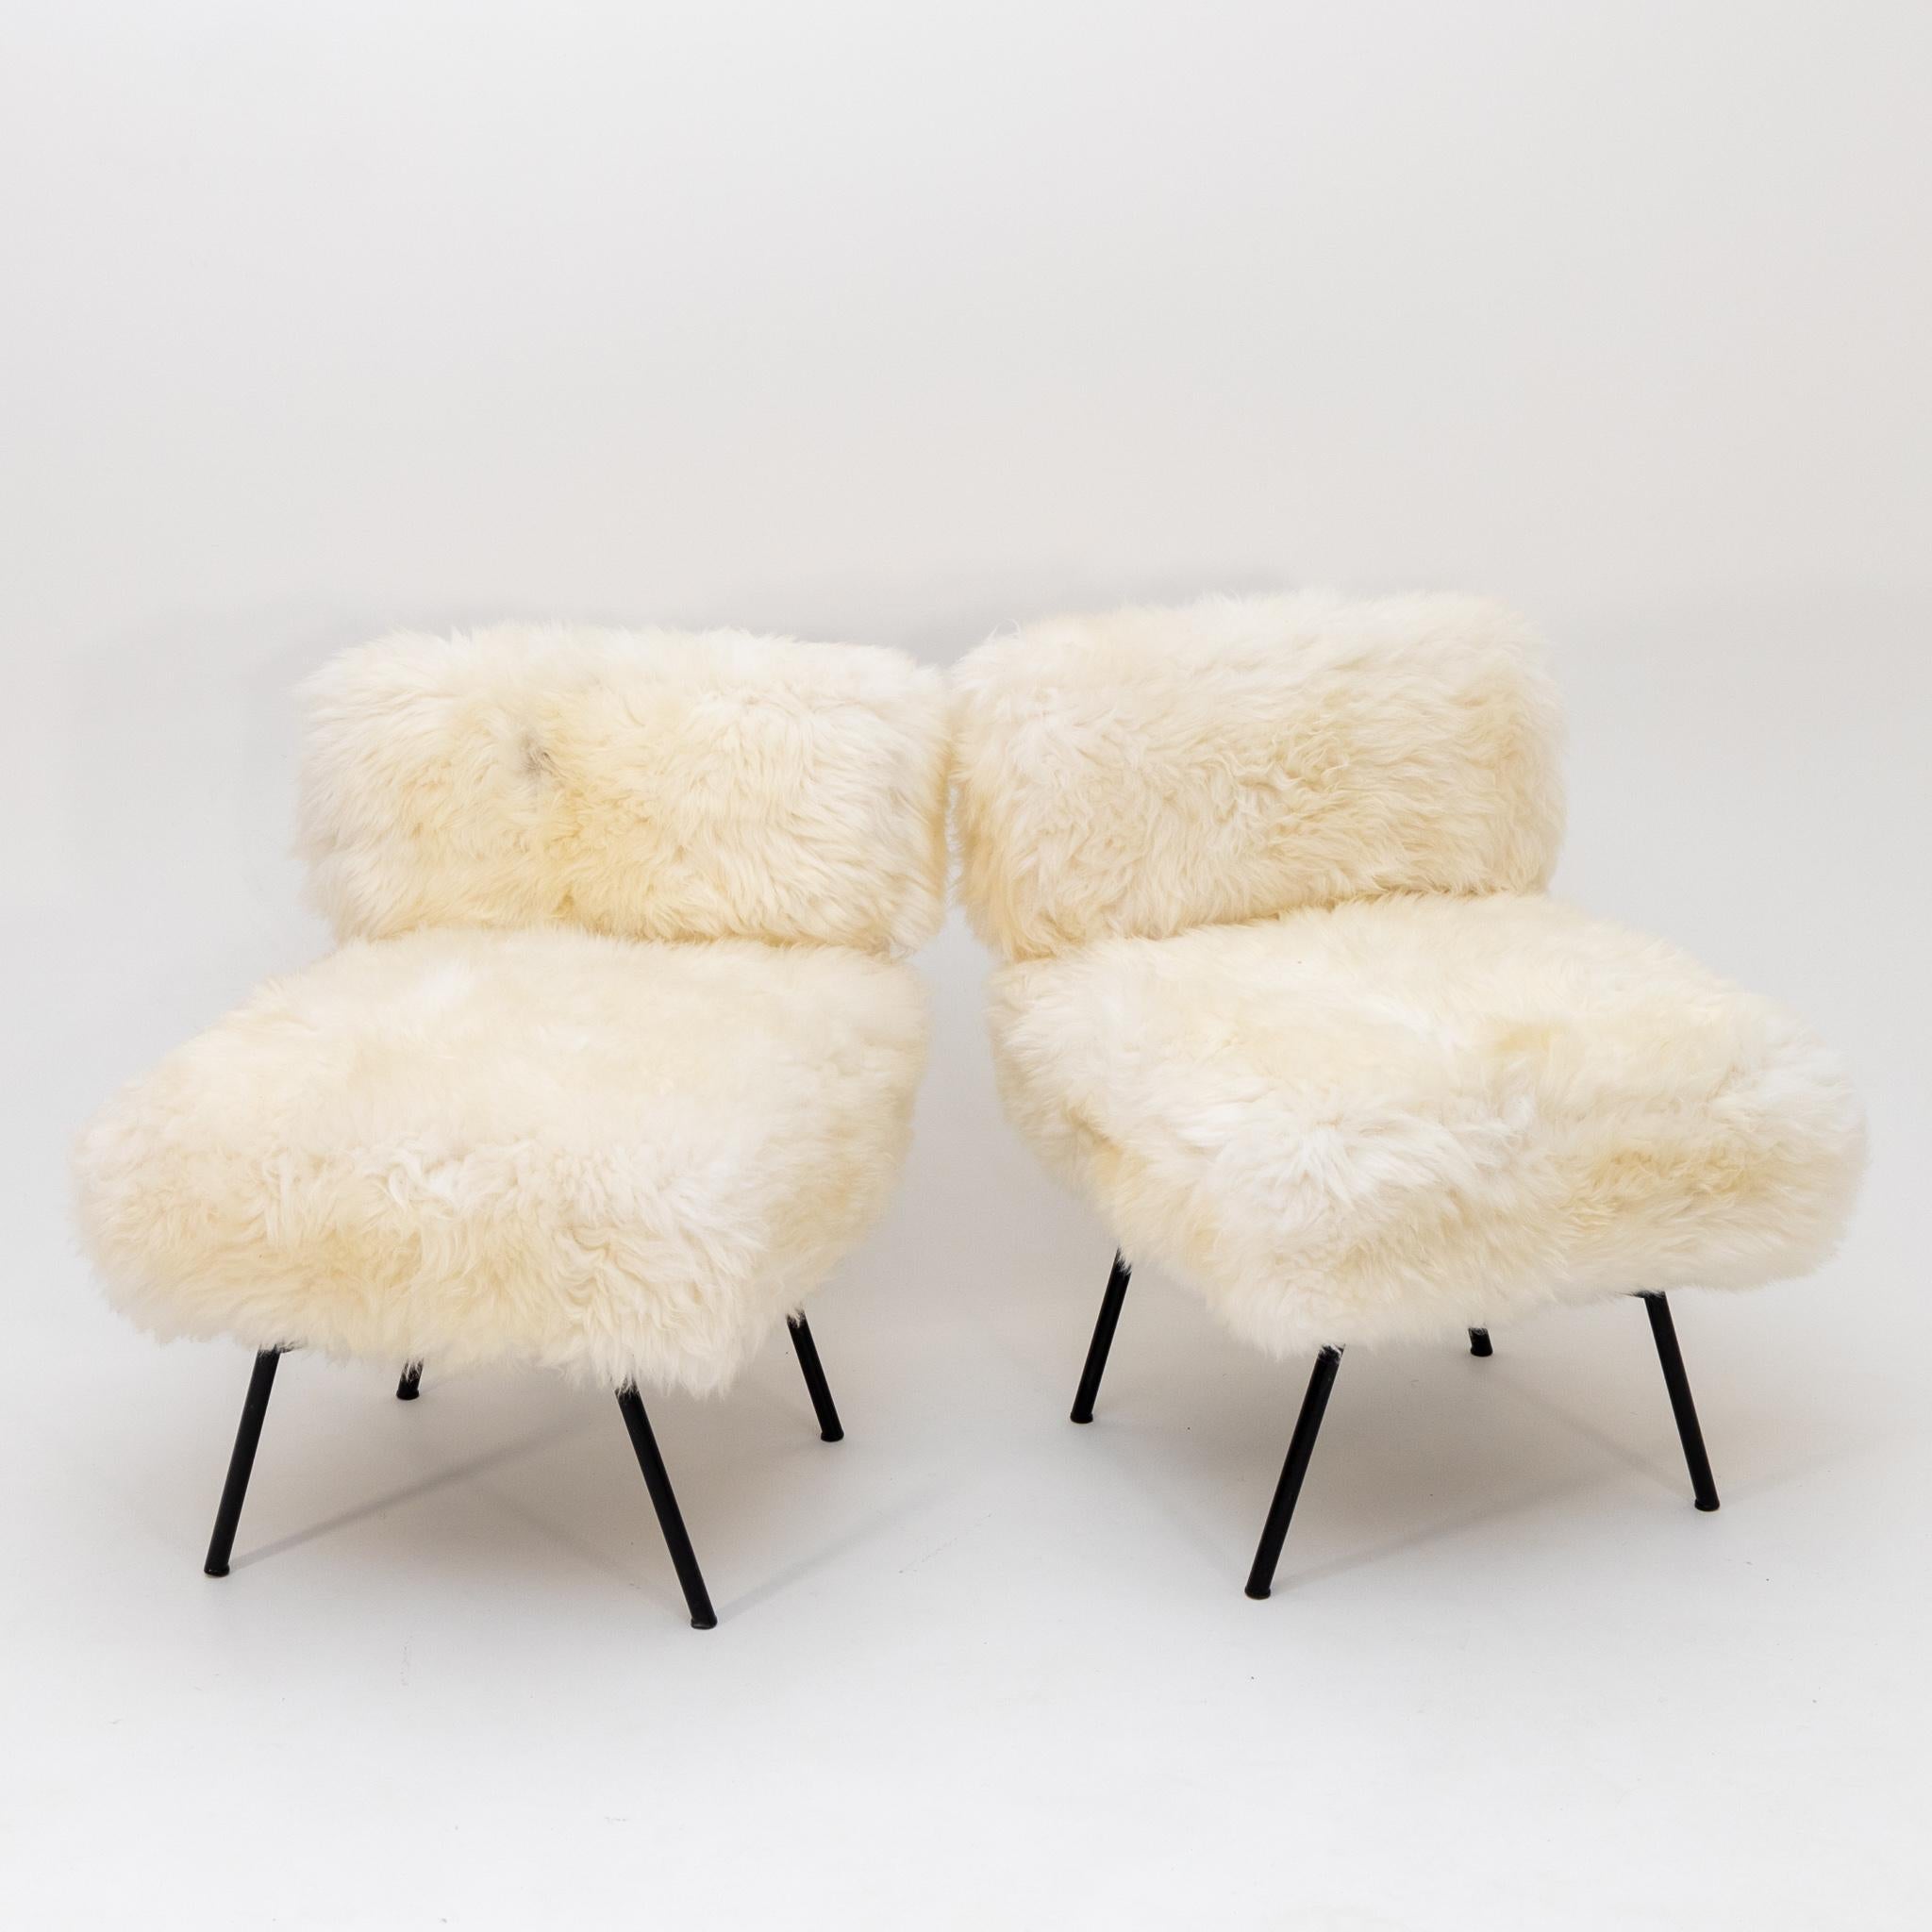 Metal Pair of Fur Slipper Chairs, Italy Mid-20th Century